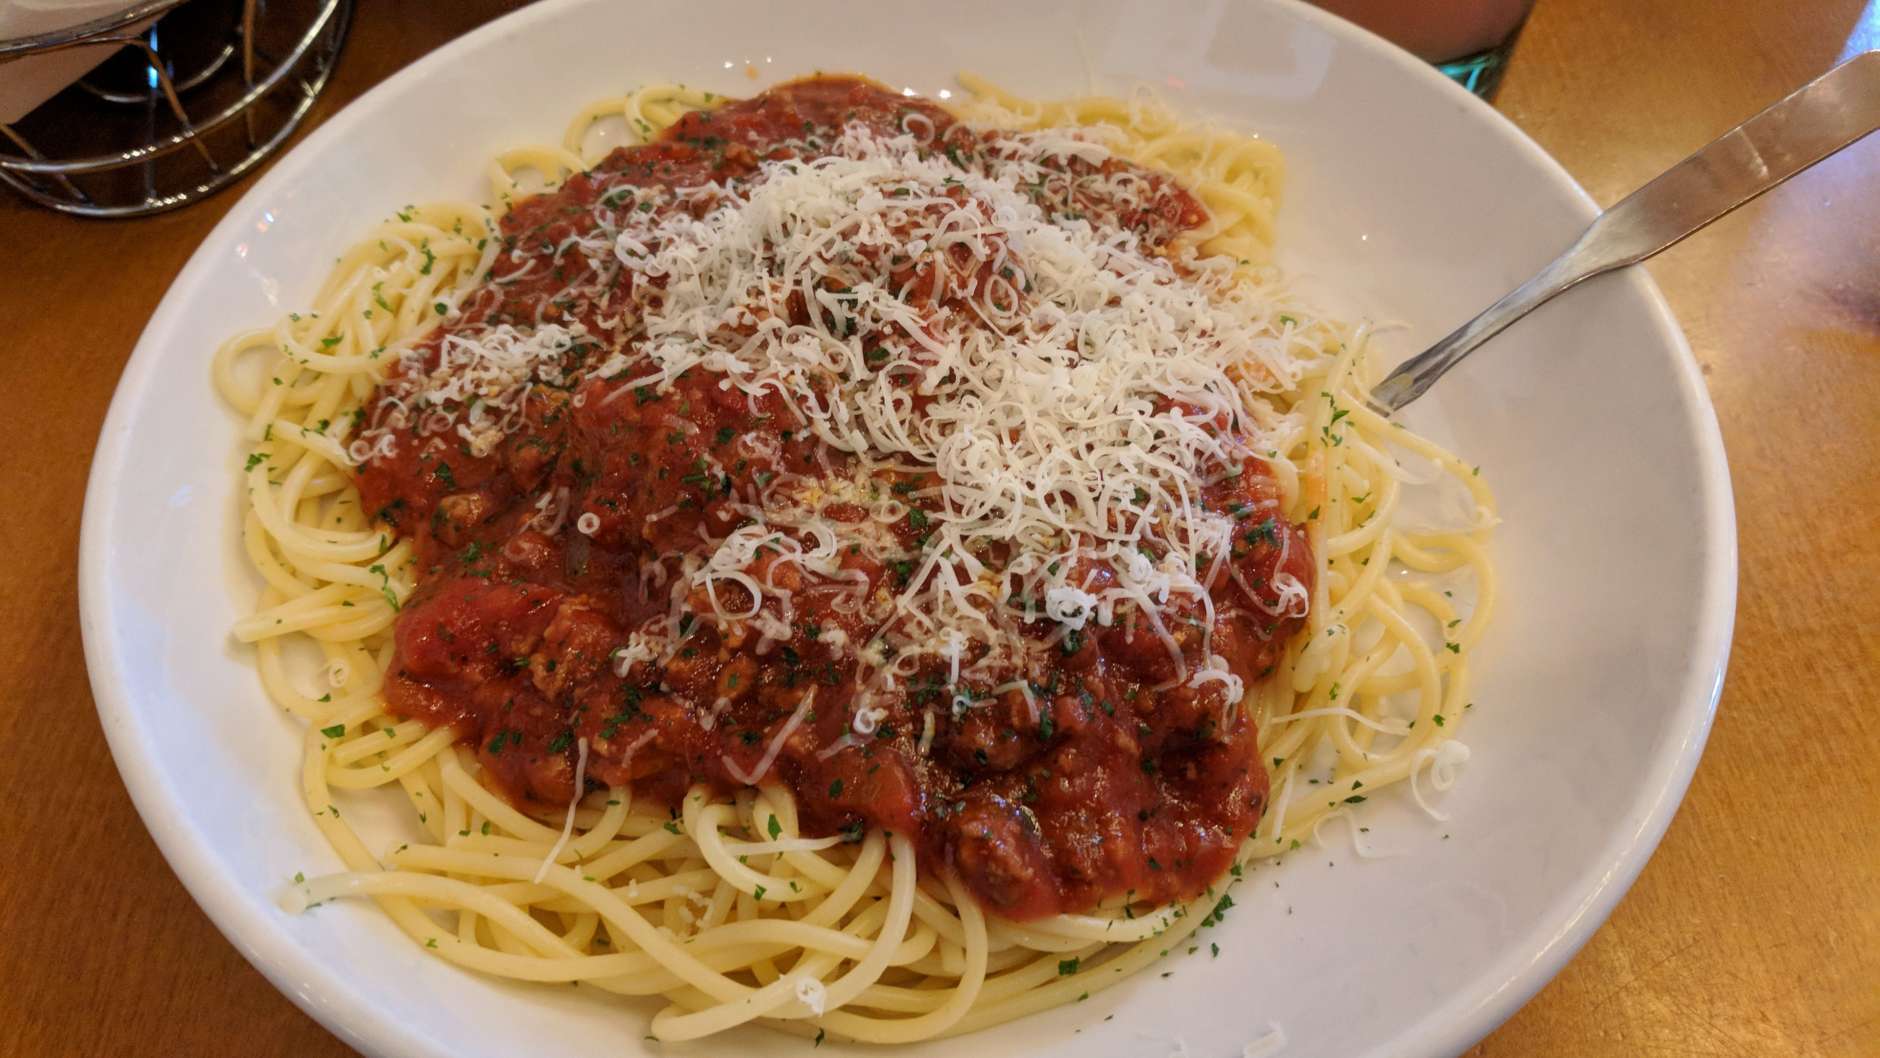 The meal: Spaghetti with traditional meat sauce and meatballs. (WTOP/Brandon Millman)